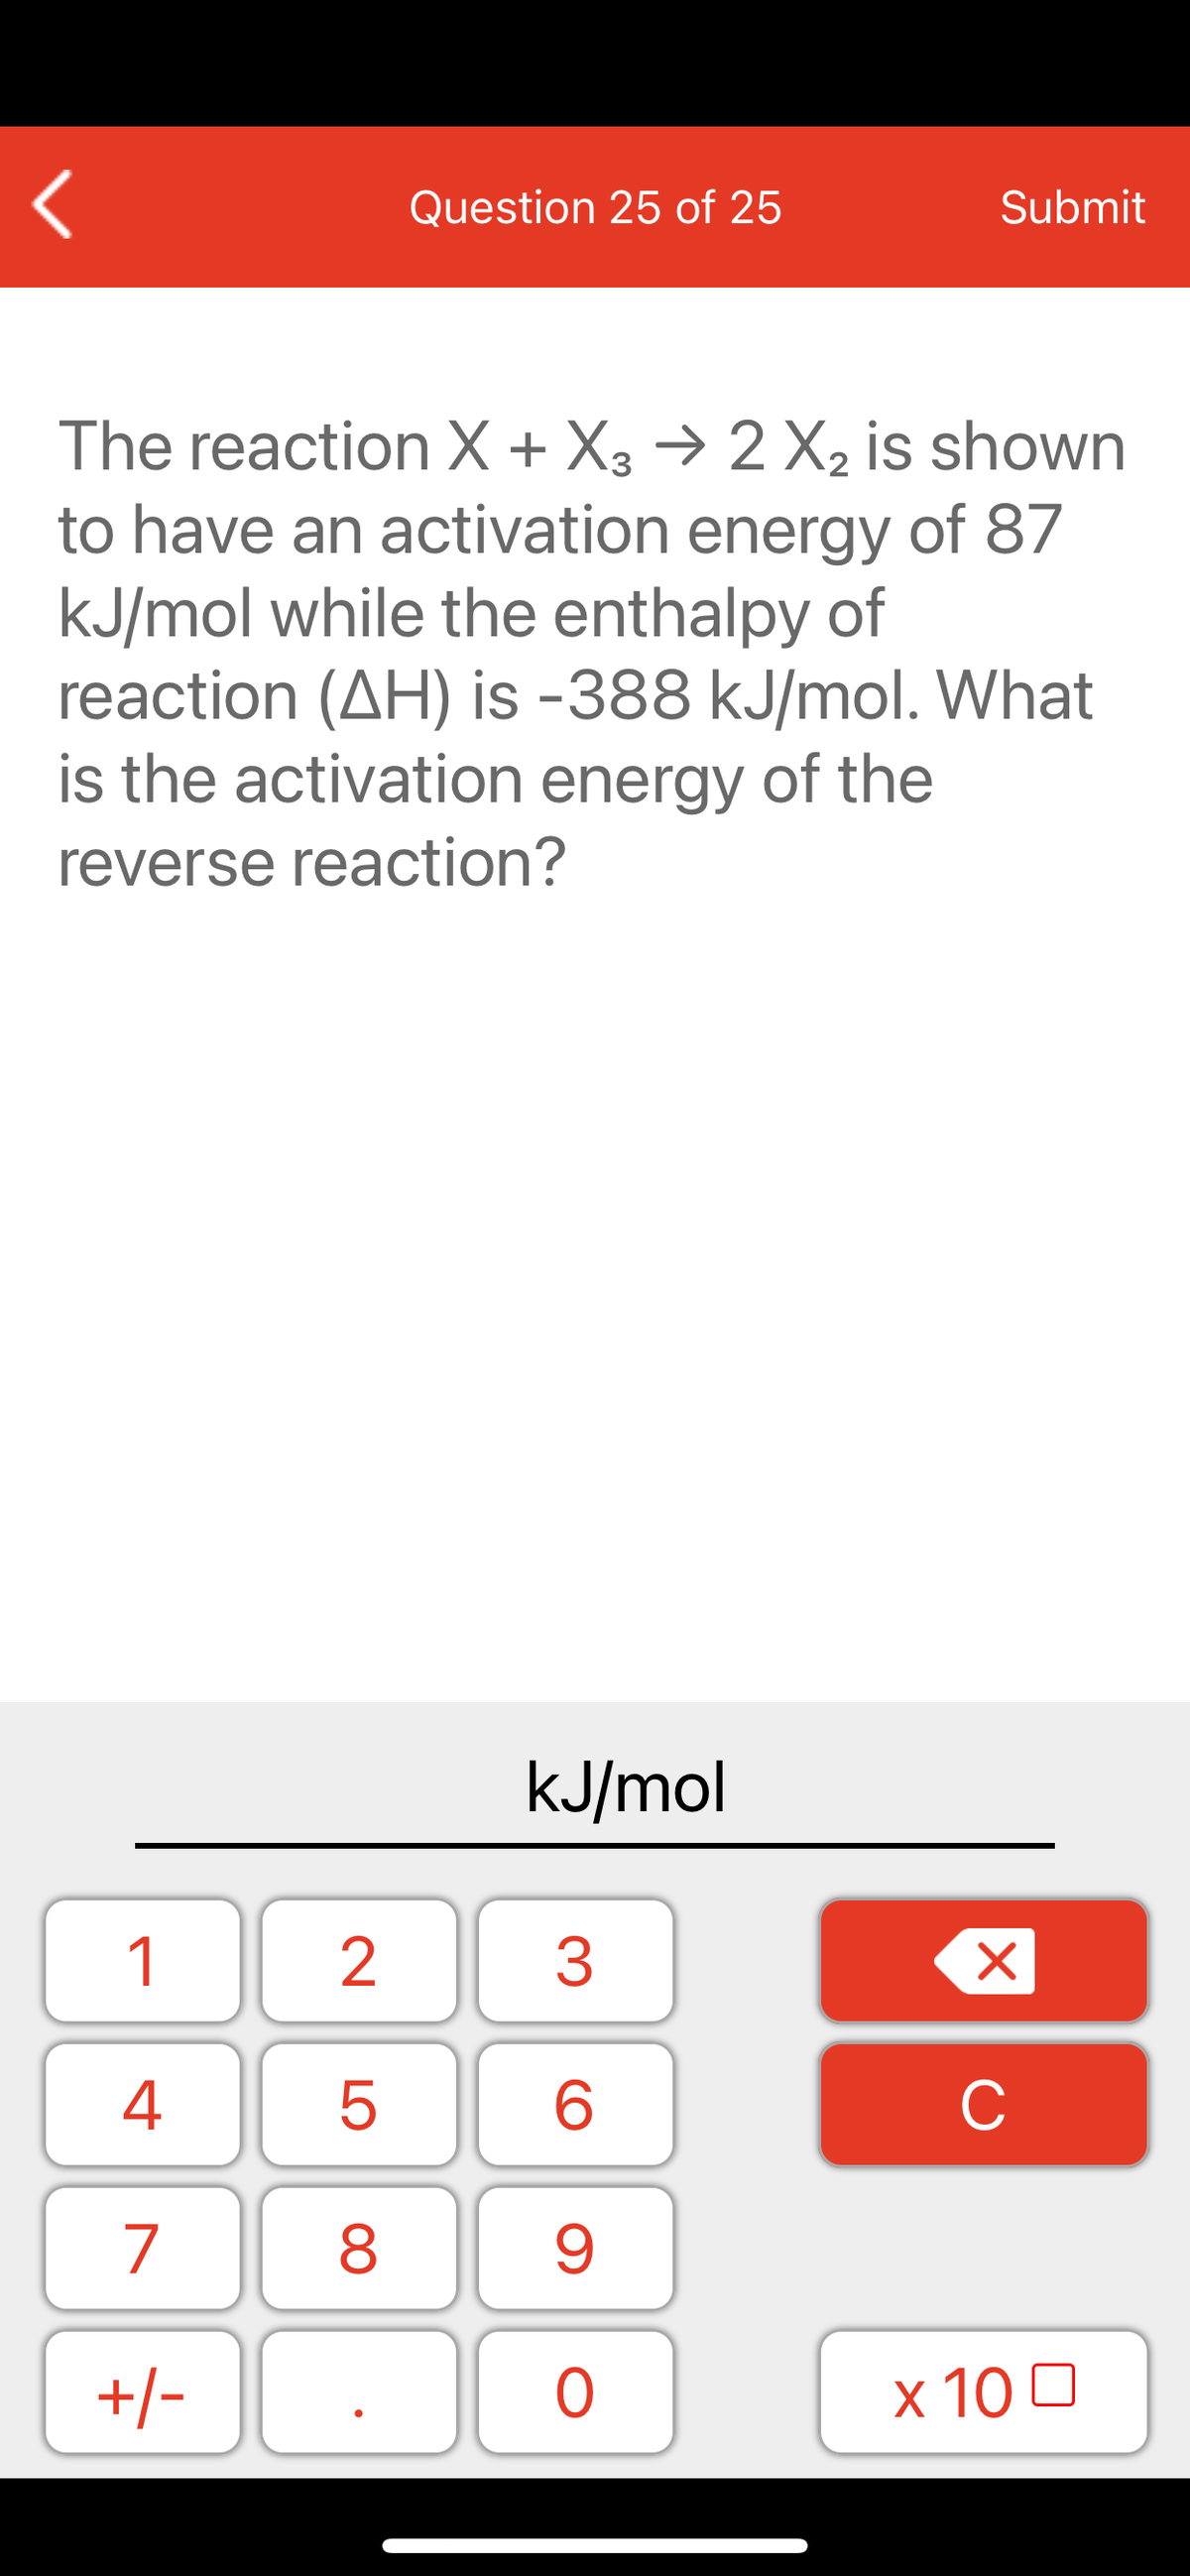 Question 25 of 25
Submit
The reaction X + X3 → 2 X2 is shown
to have an activation energy of 87
kJ/mol while the enthalpy of
reaction (AH) is -388 kJ/mol. What
is the activation energy of the
reverse reaction?
kJ/mol
1
2
3
C
7
9.
+/-
x 10 0
LO
00
